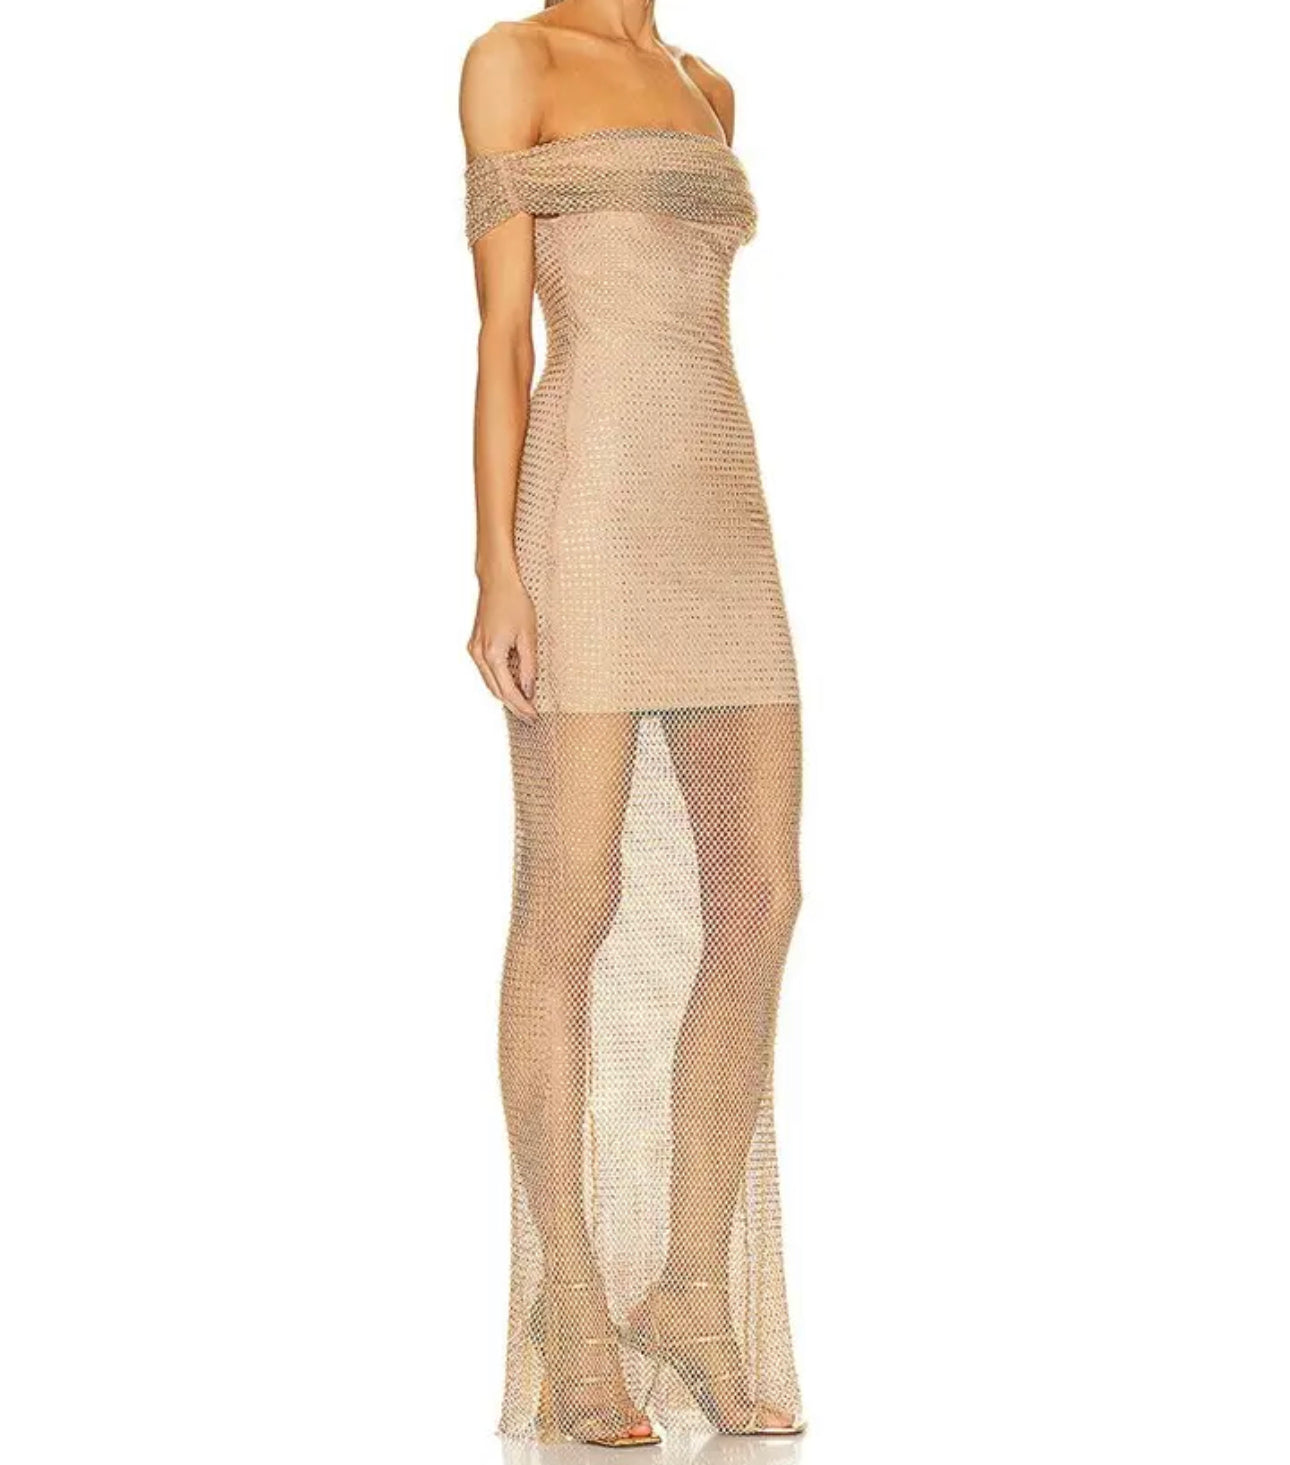 Carrie nude gold embellished maxi dress